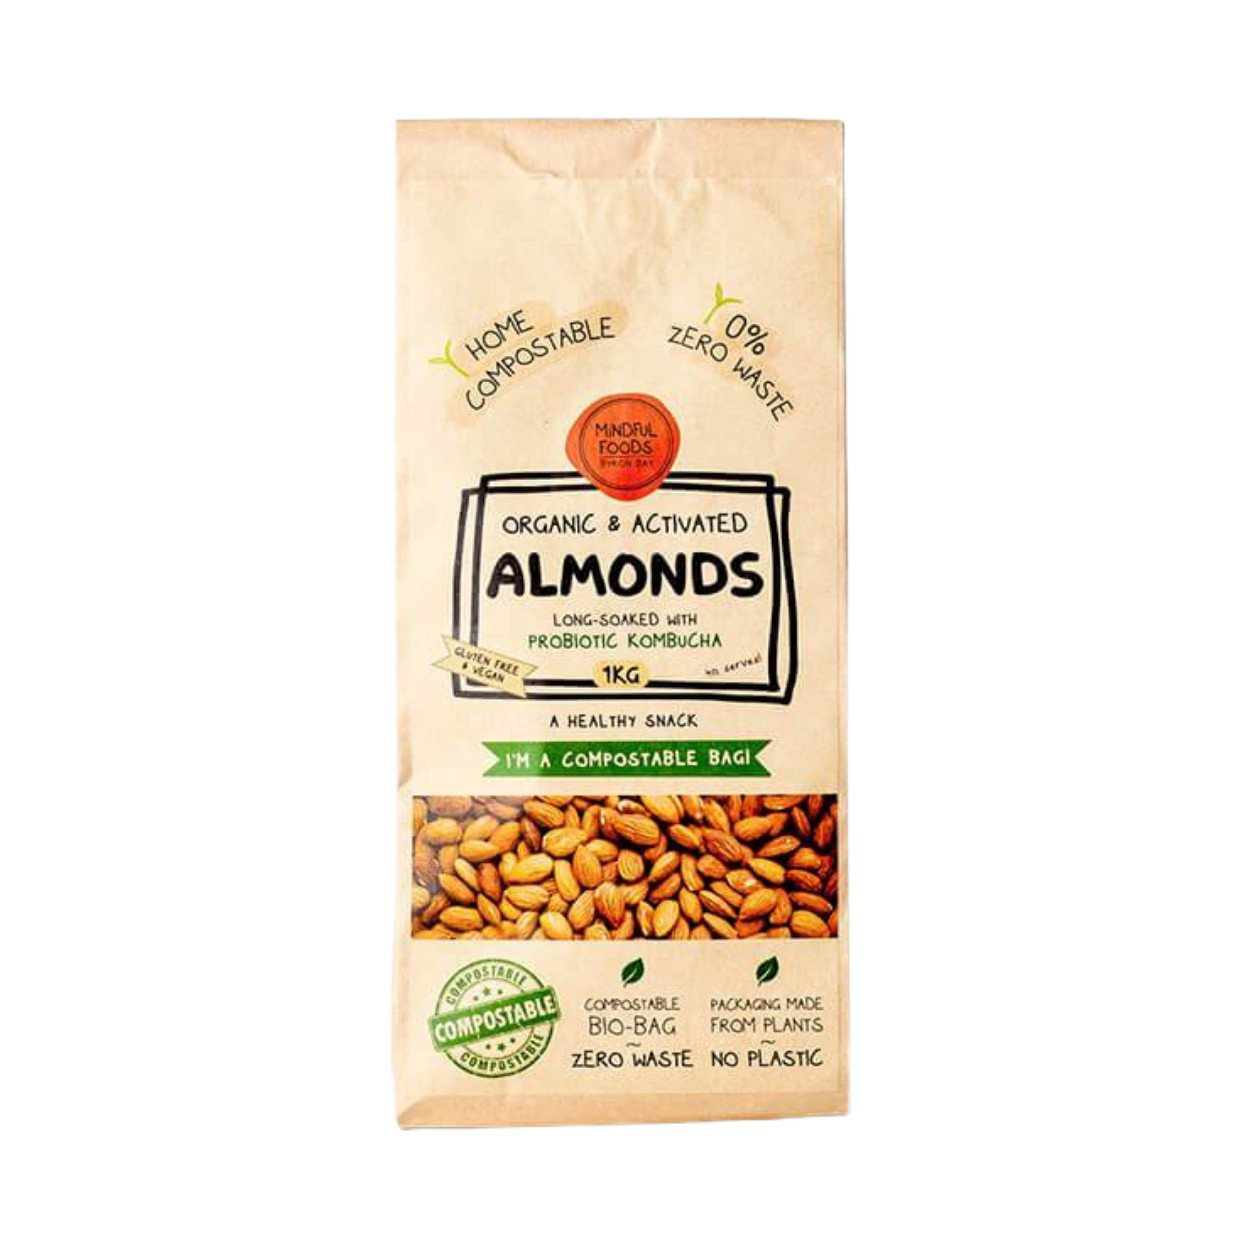 Mindful Foods Almonds 225g, 450g Or 1kg, Organic & Activated; Long Soaked With Probiotic Kombucha